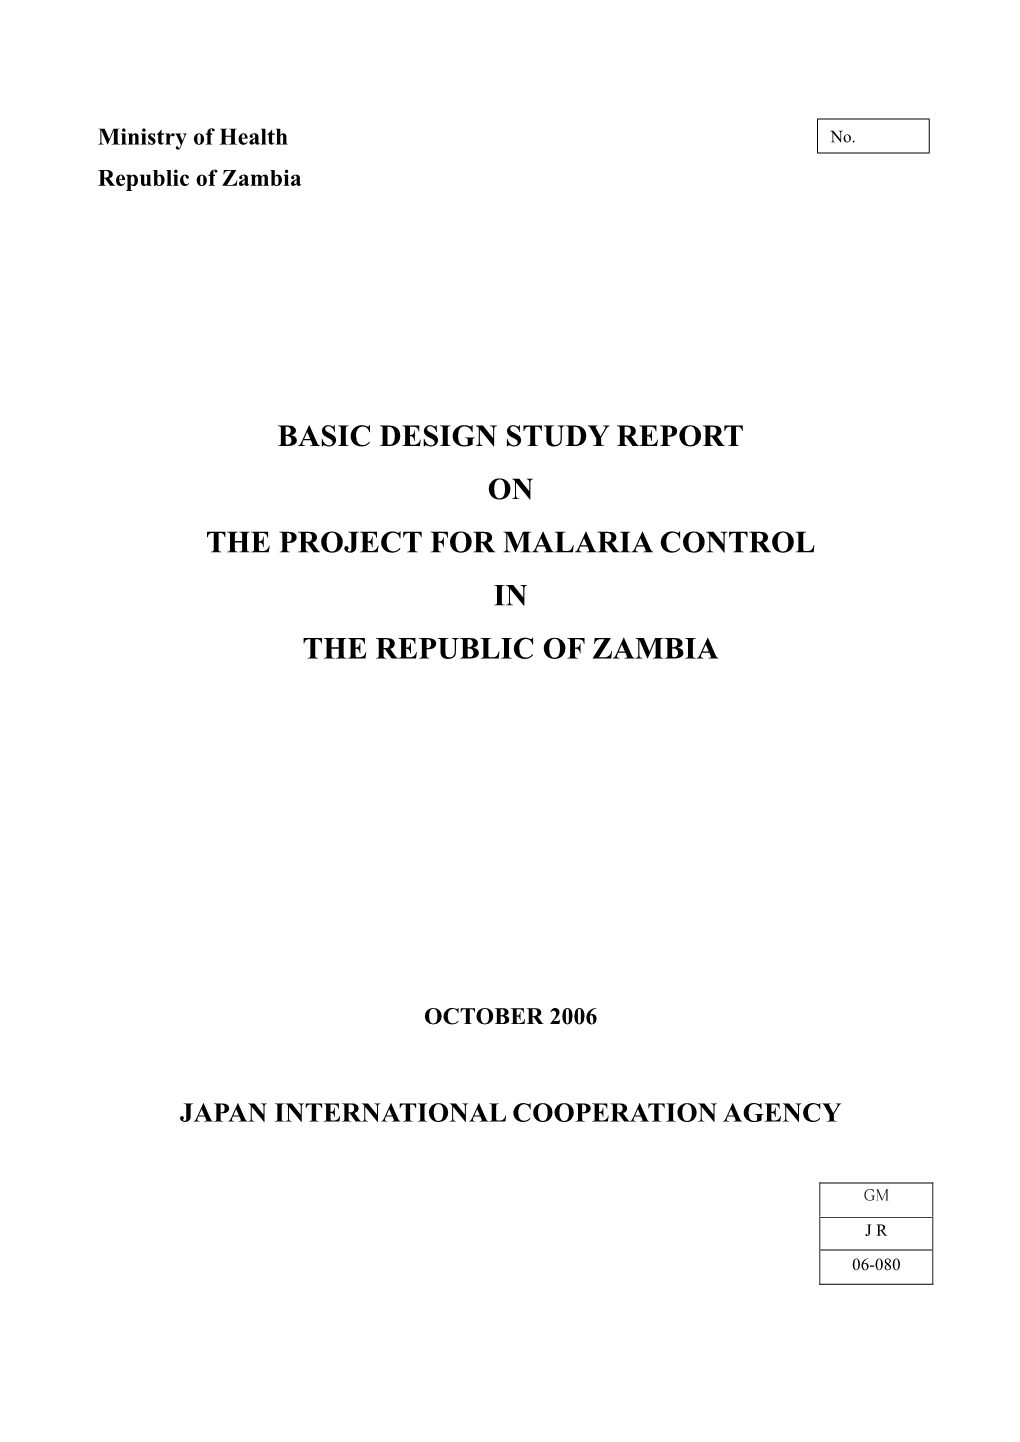 Basic Design Study Report on the Project for Malaria Control in the Republic of Zambia